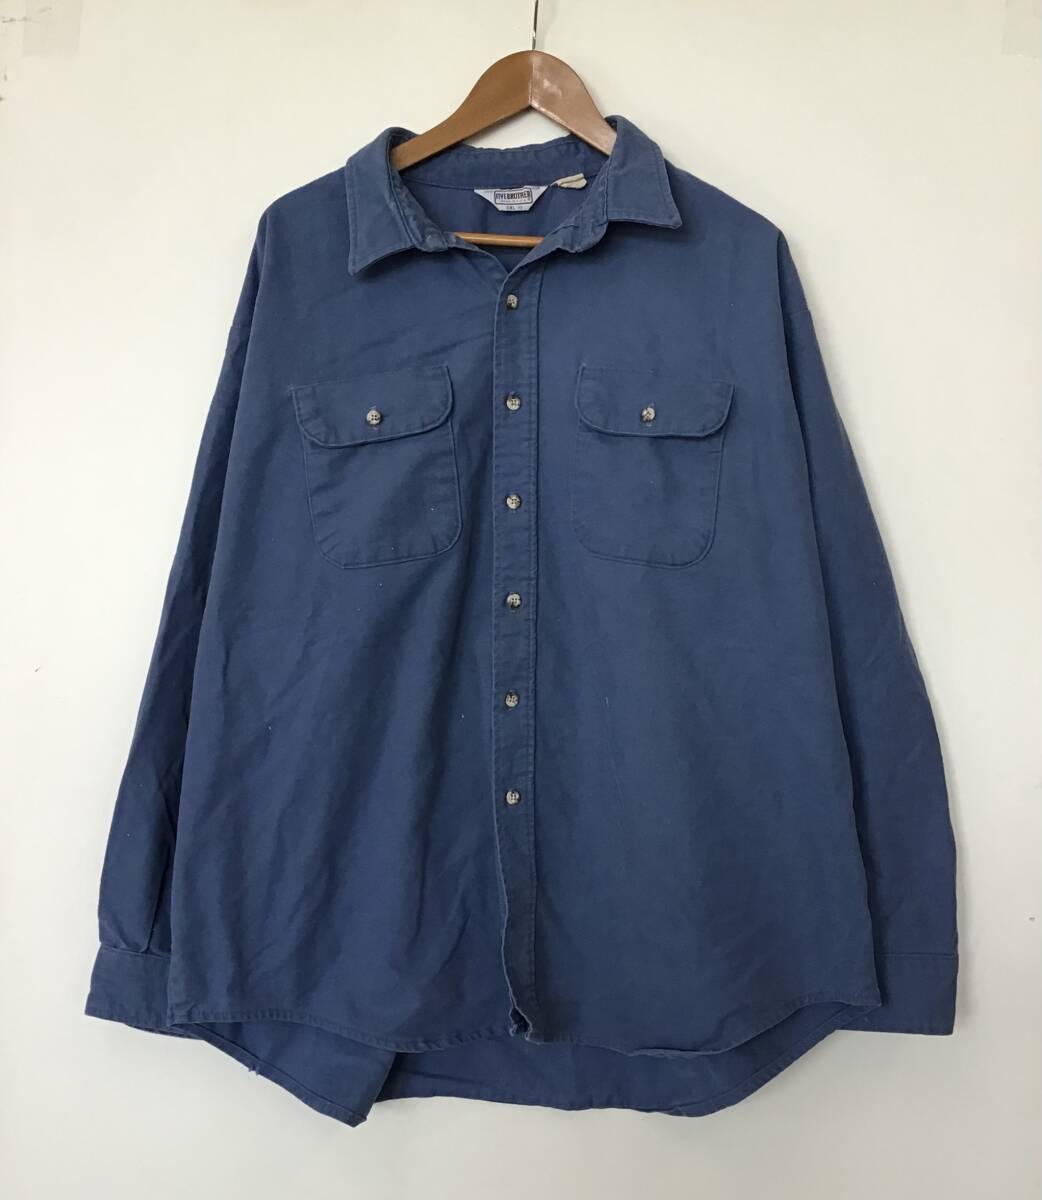 《 H 272》FIVE BROTHER ファイブブラザー 長袖ネルシャツ 70~80's made in USA 3XL トップス 1円スタート アメリカ古着 古着卸_画像1